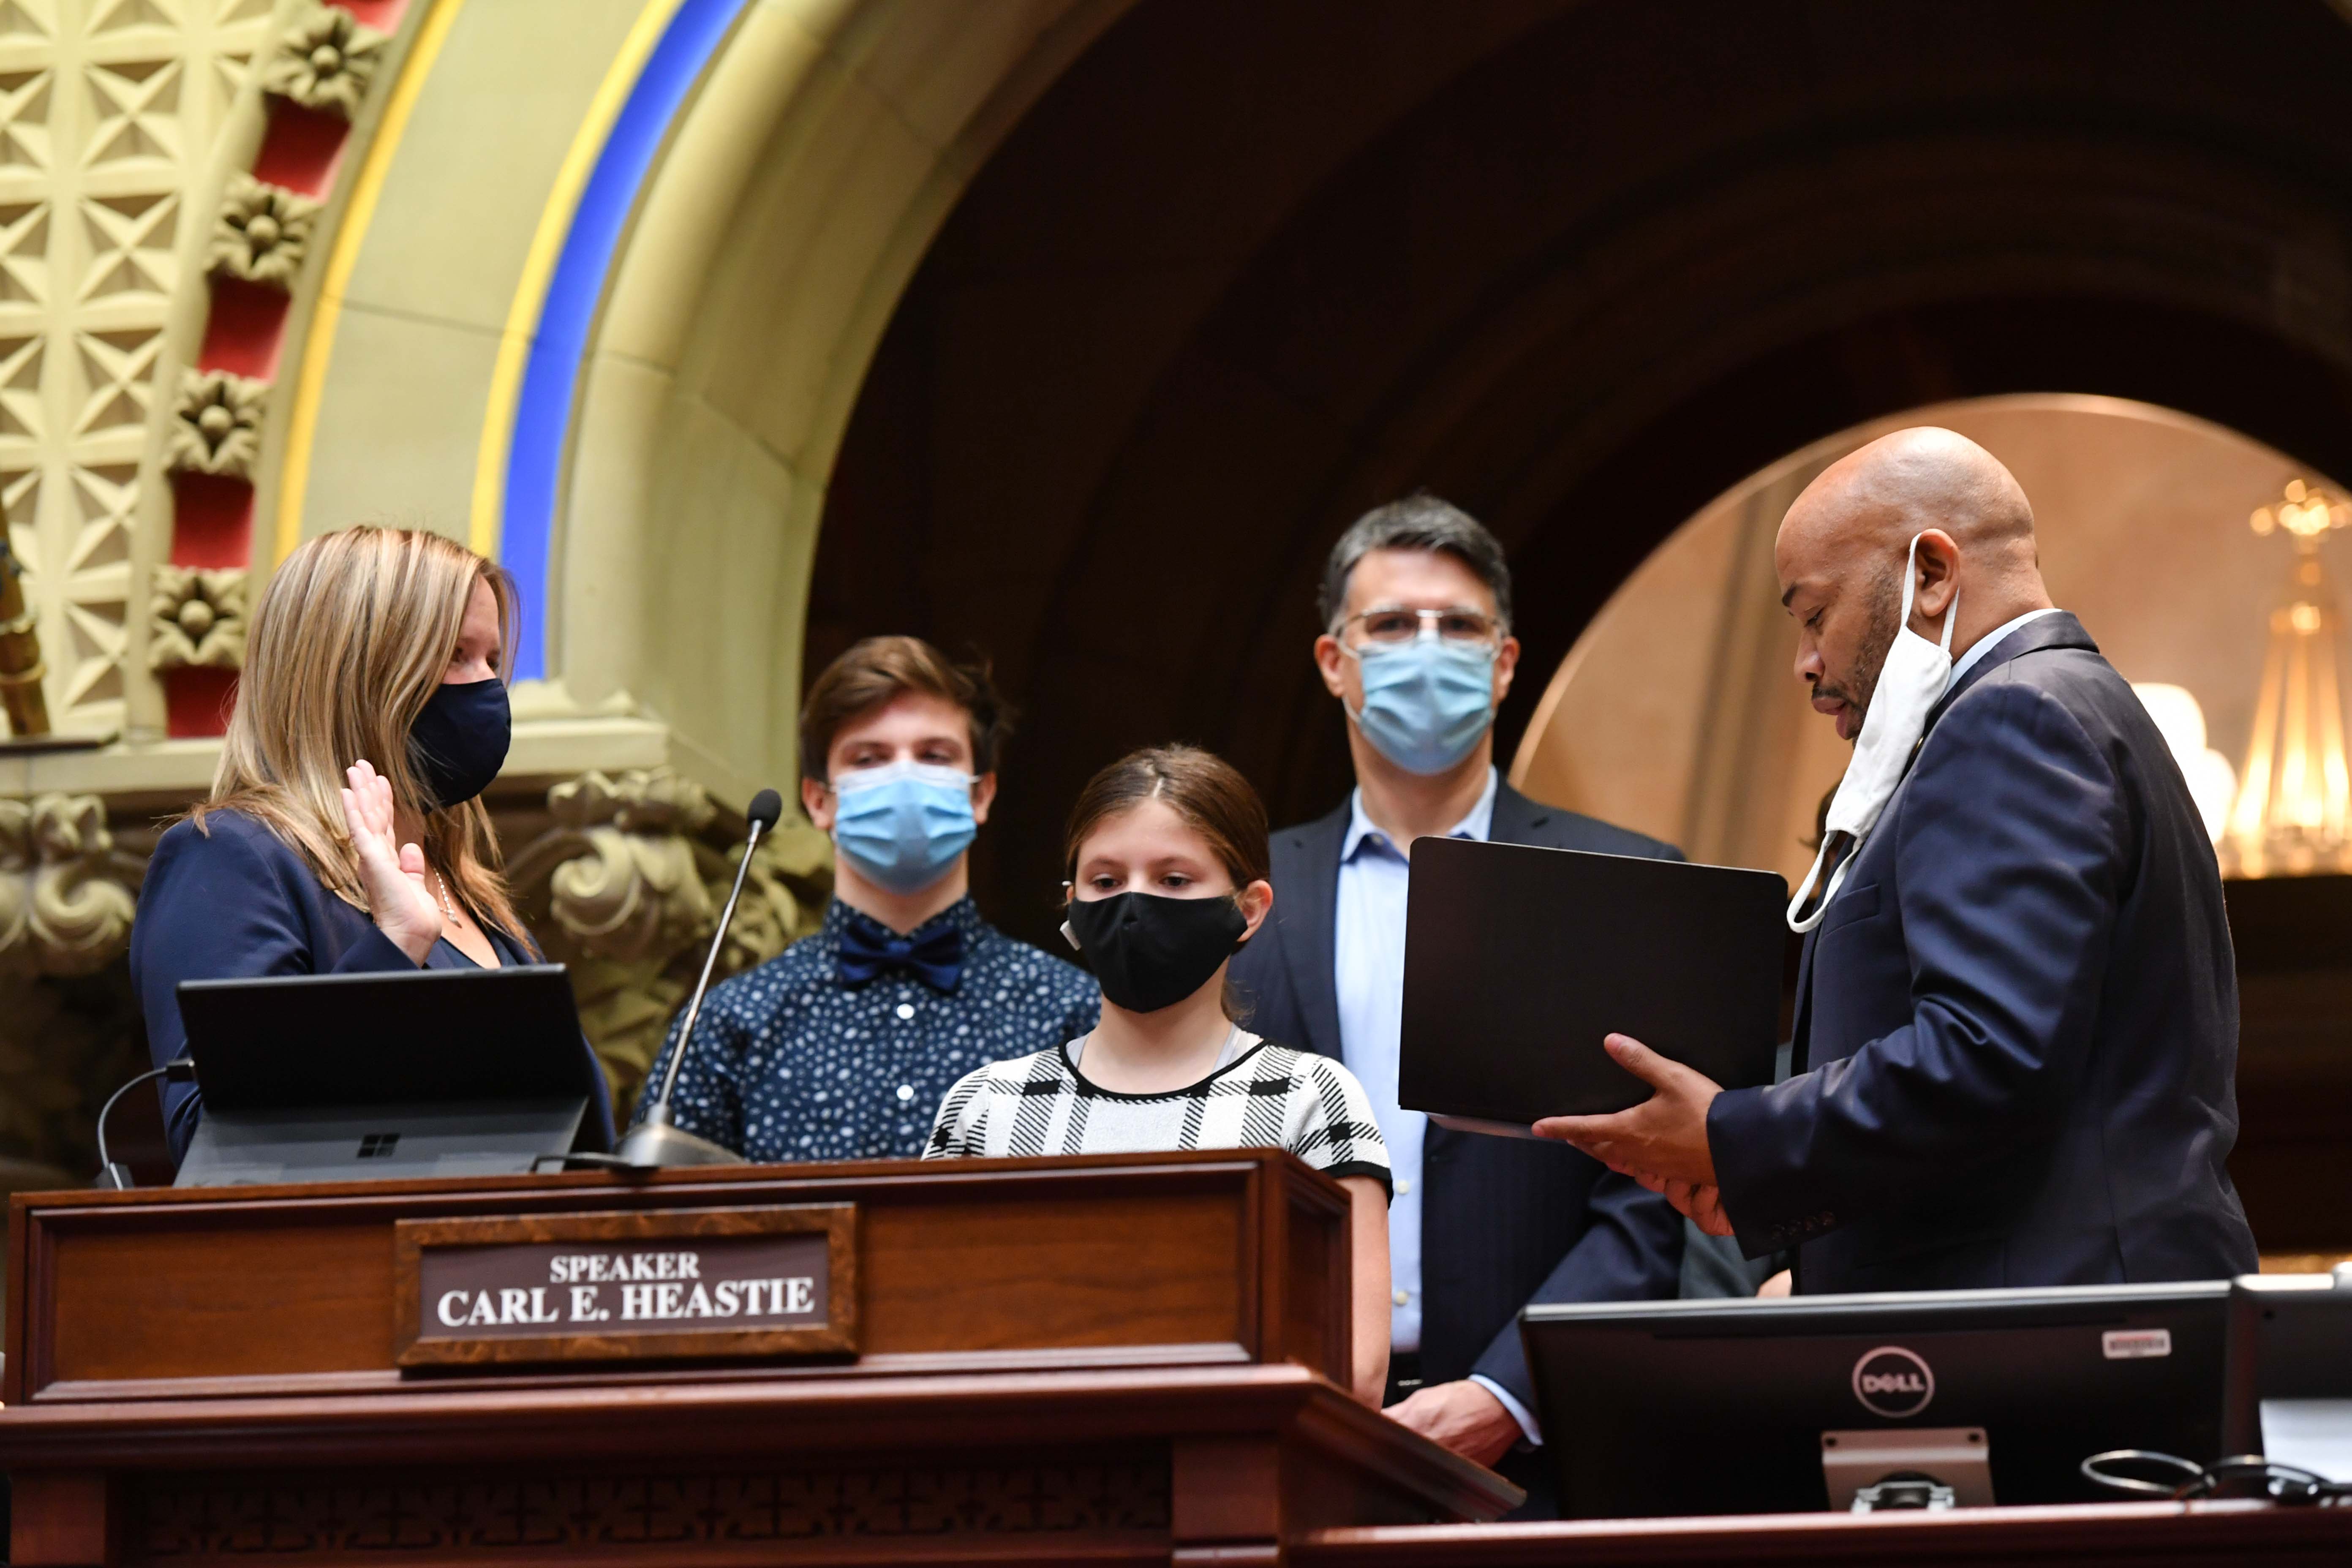 Speaker Carl Heastie swears in new Assemblymember Sarah Clark to represent the 136th AD